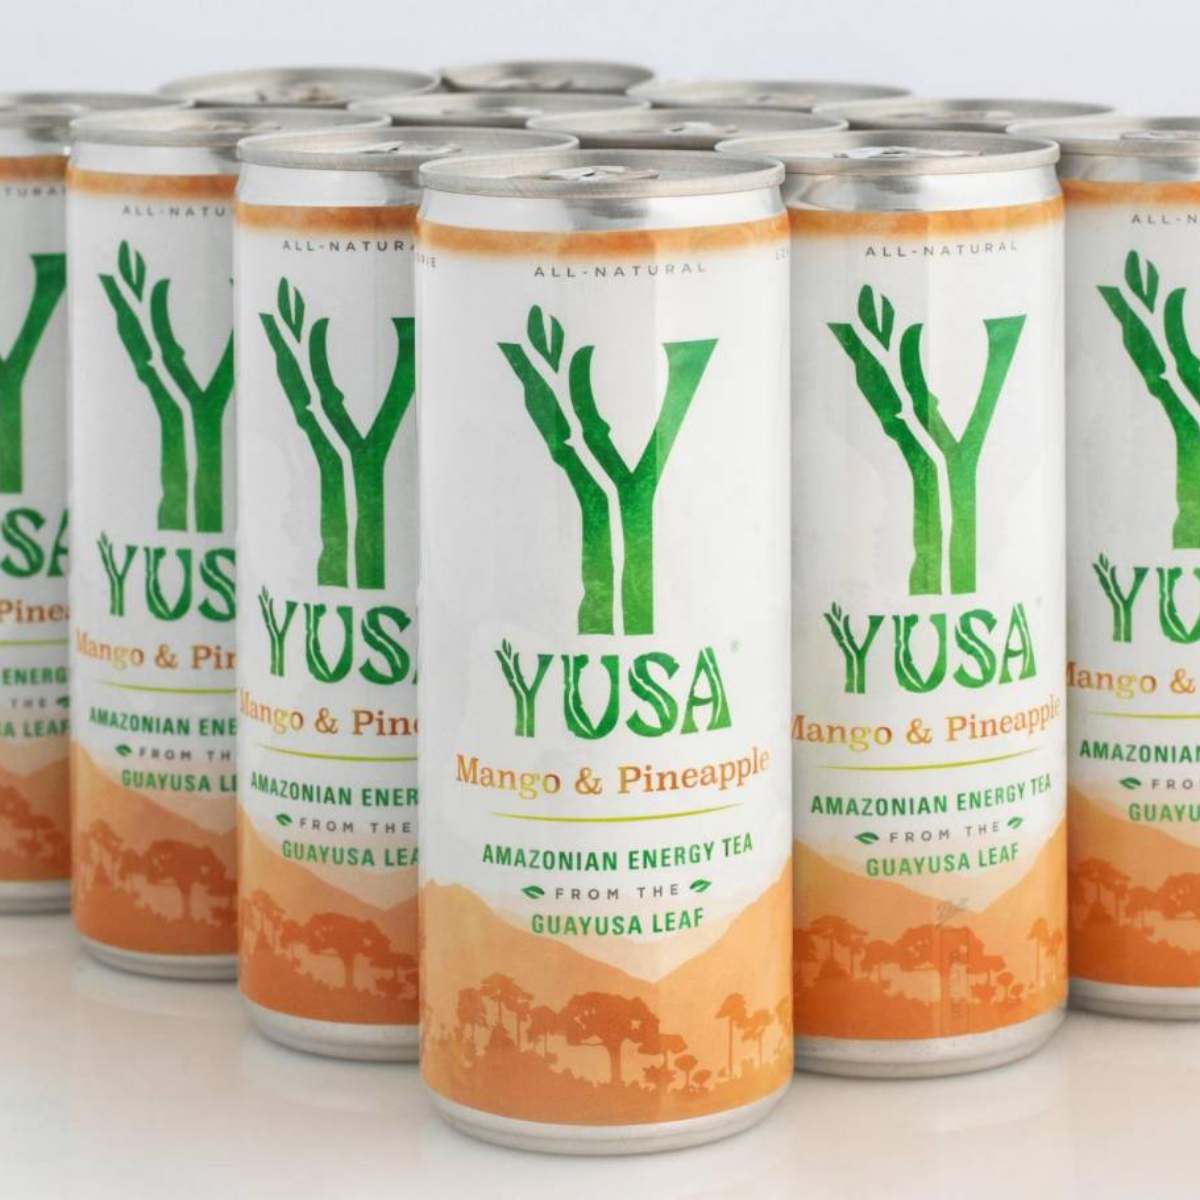 Yusa - The Plant Based Energy Drink.